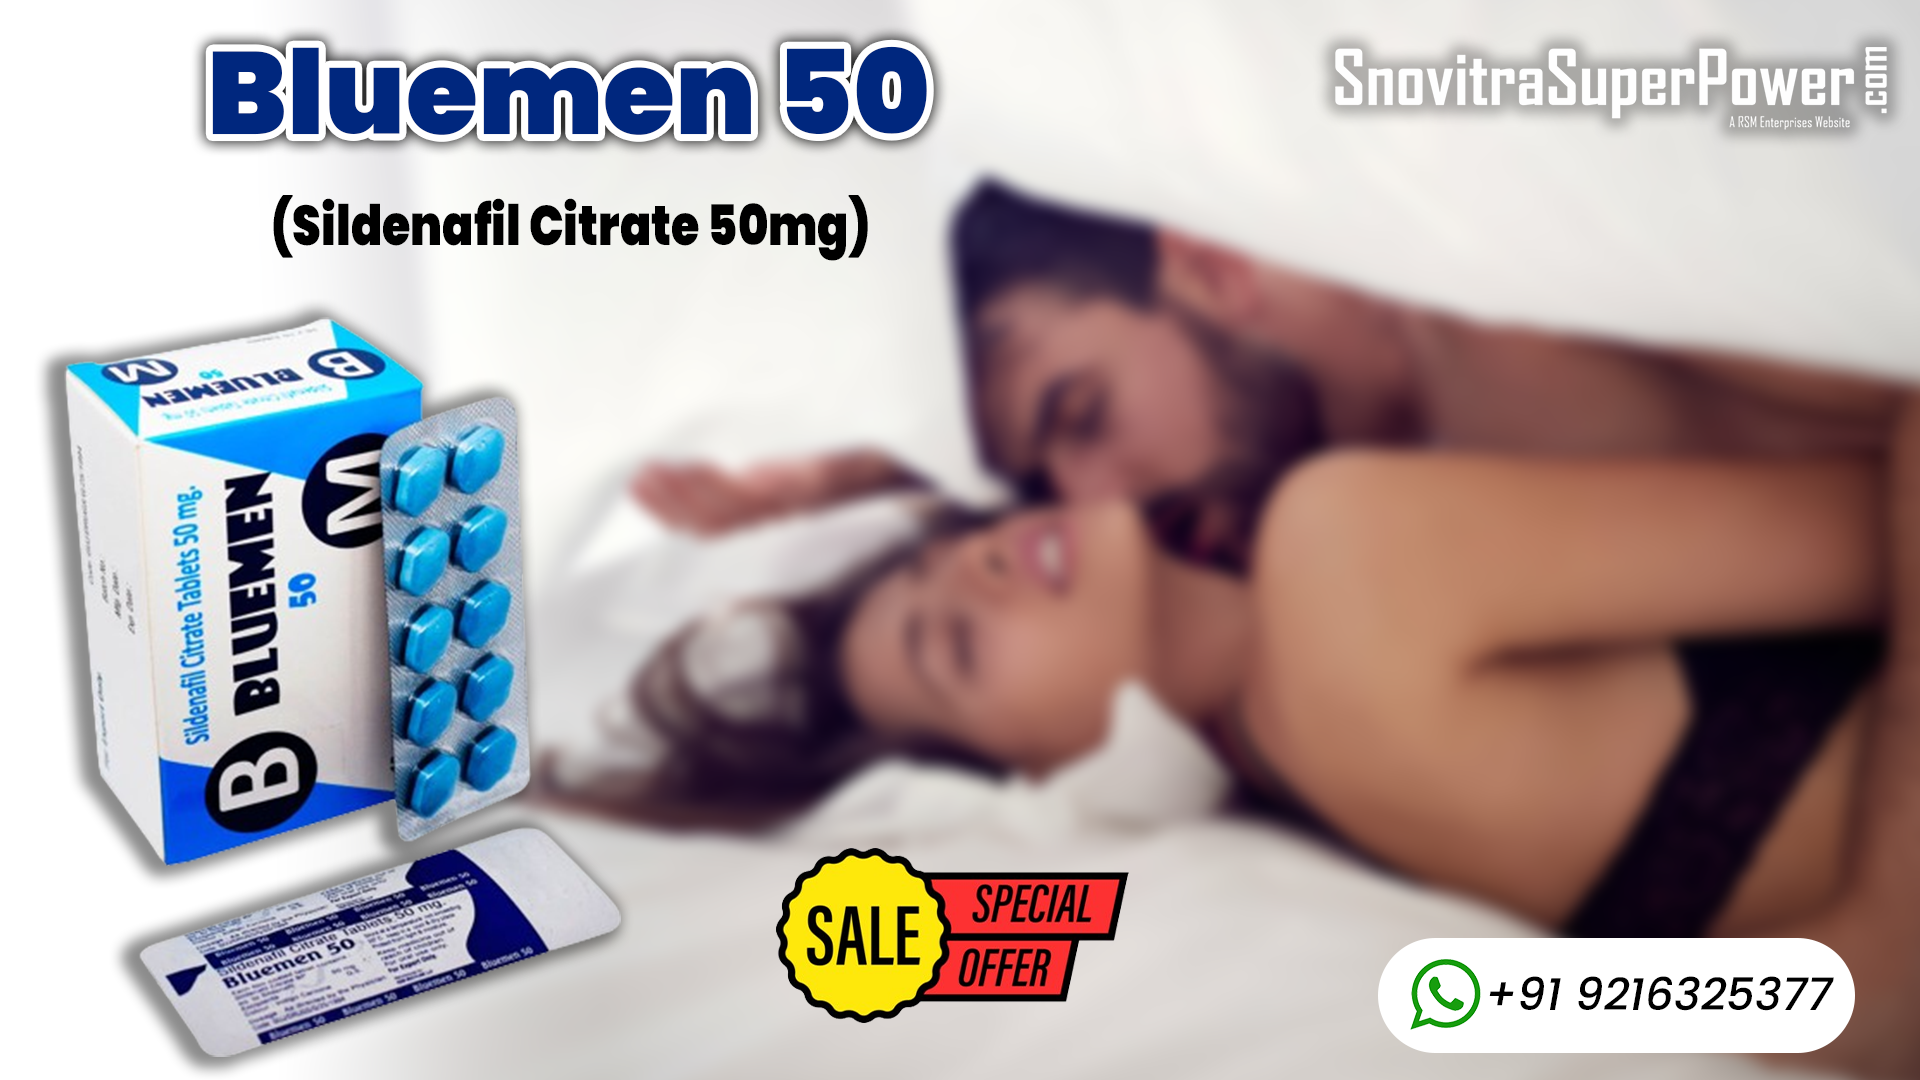 Bluemen 50: An Instant Solution to Be Free Of Erection Failure